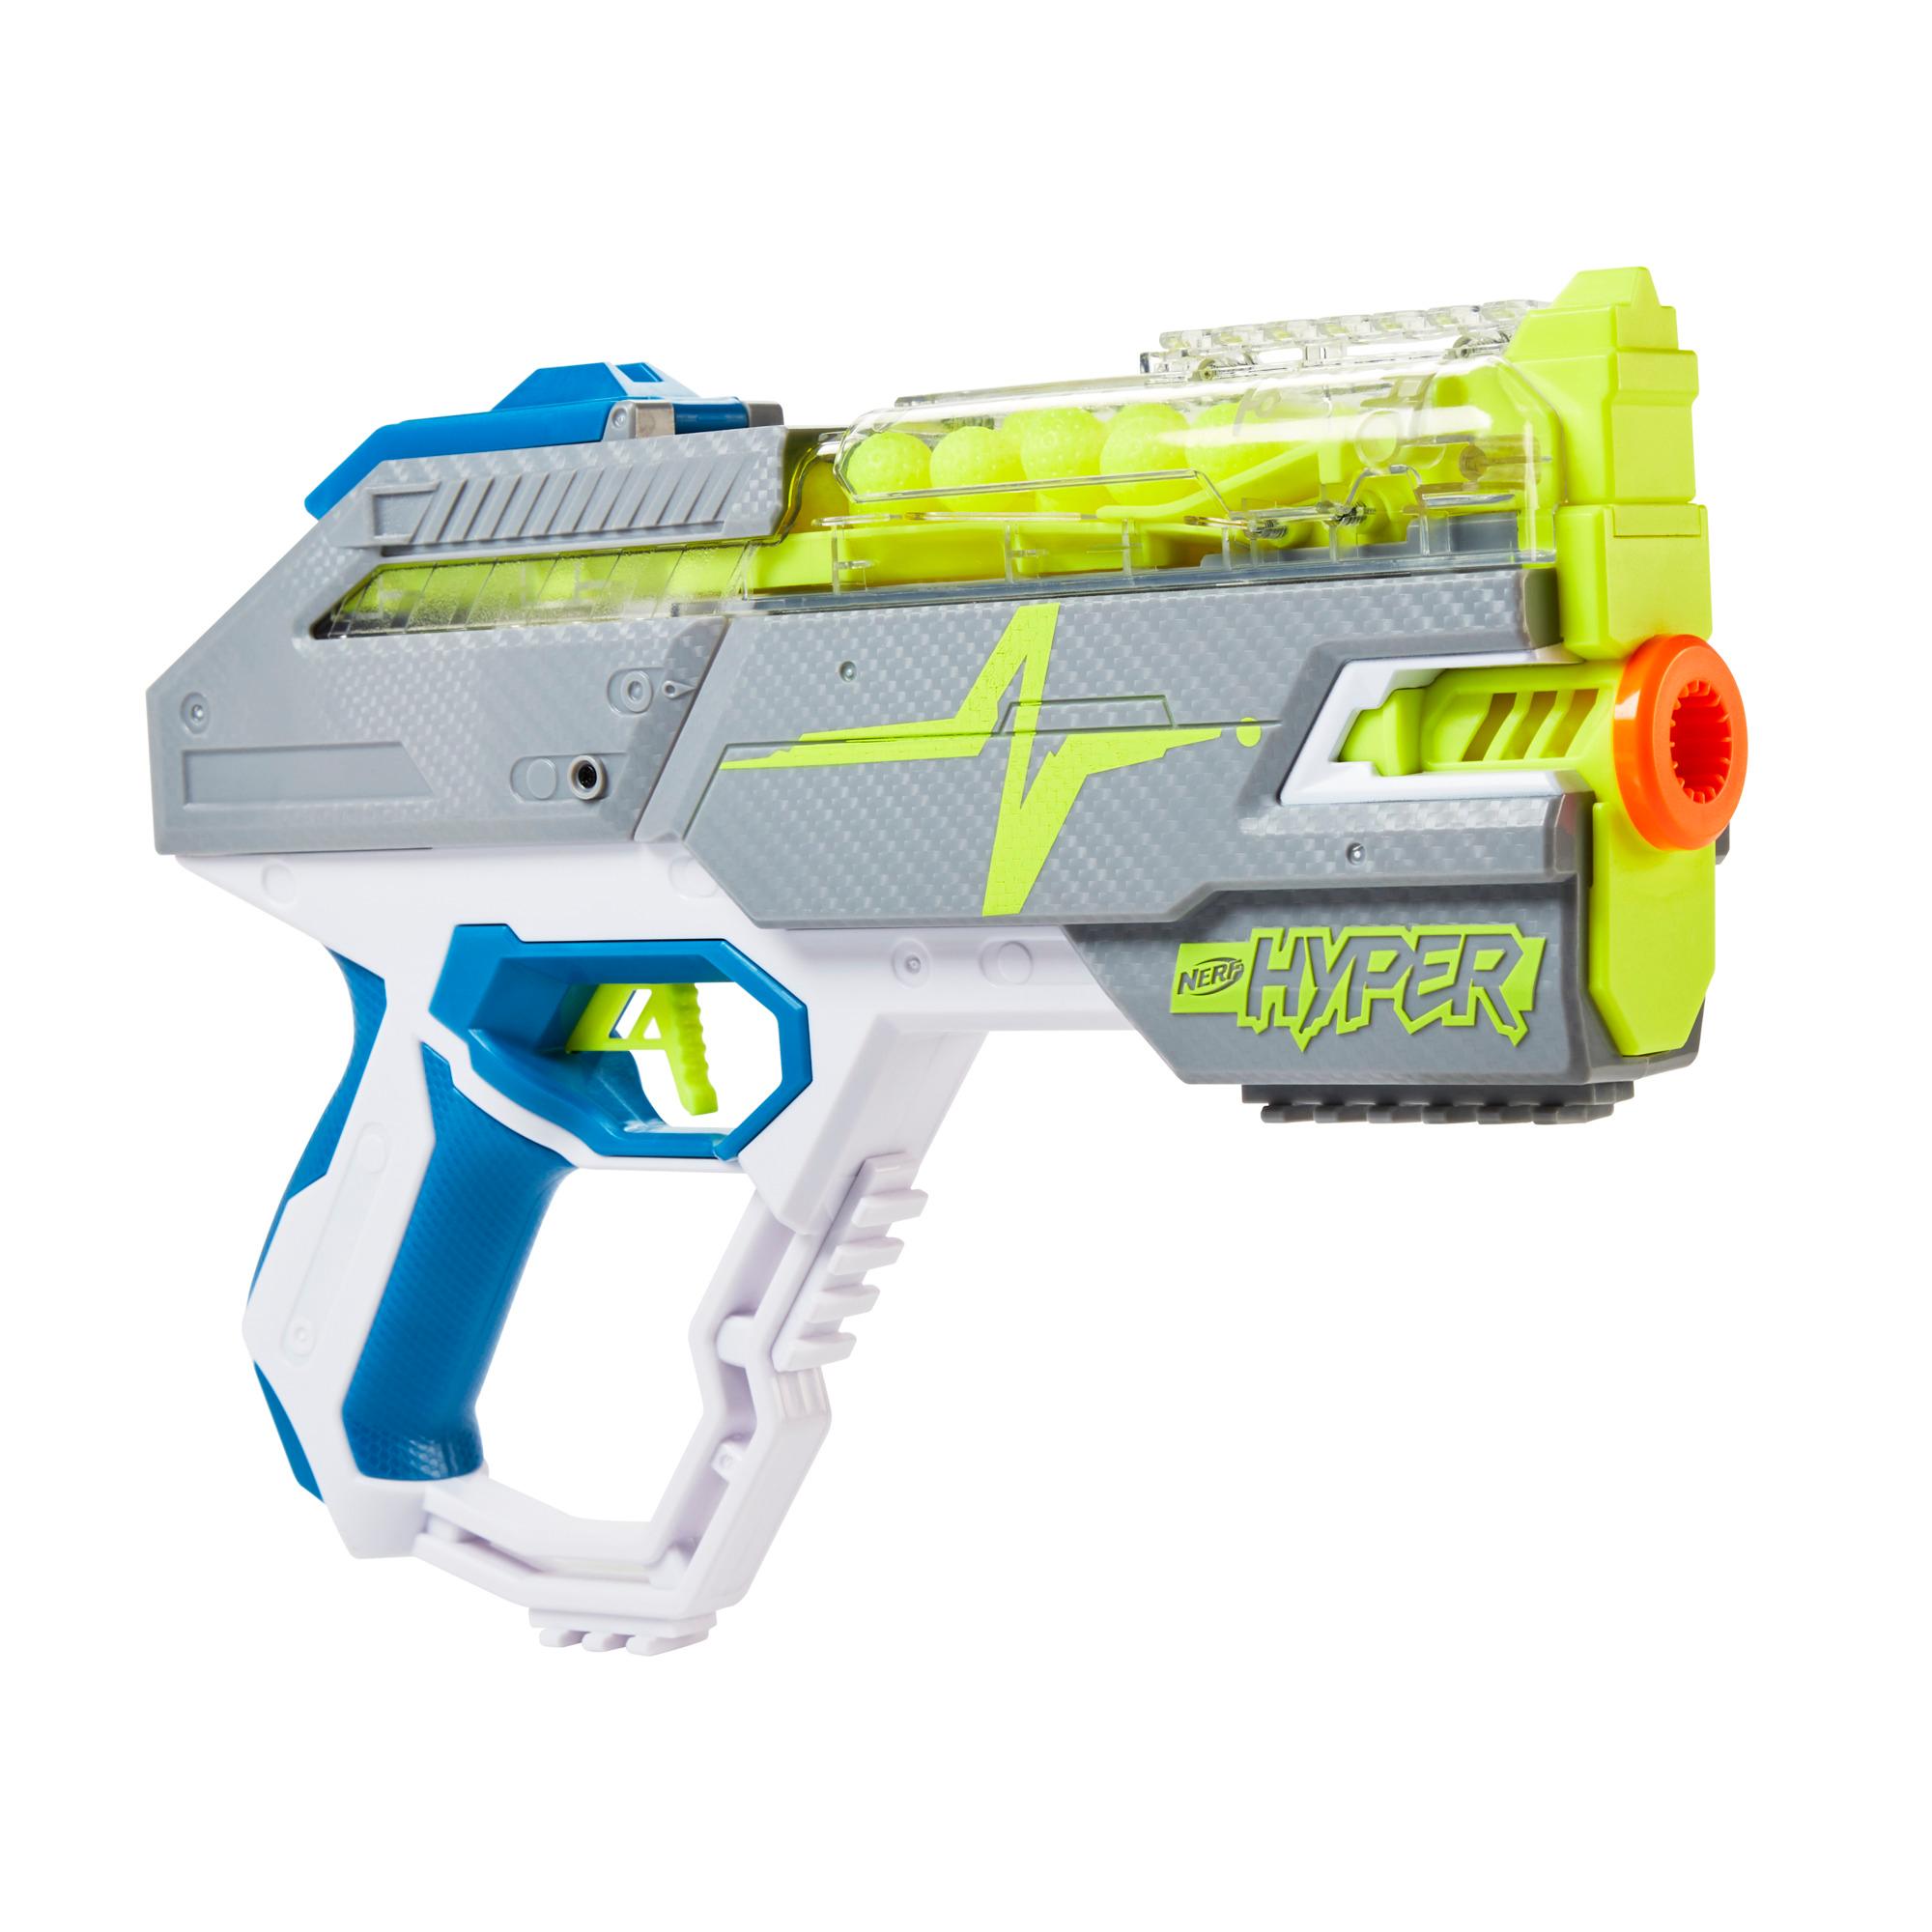 Nerf Hyper Rush-40 Pump-Action Blaster and 30 Nerf Hyper Rounds, 110 FPS Velocity, Easy Reload, 40-Round Capacity